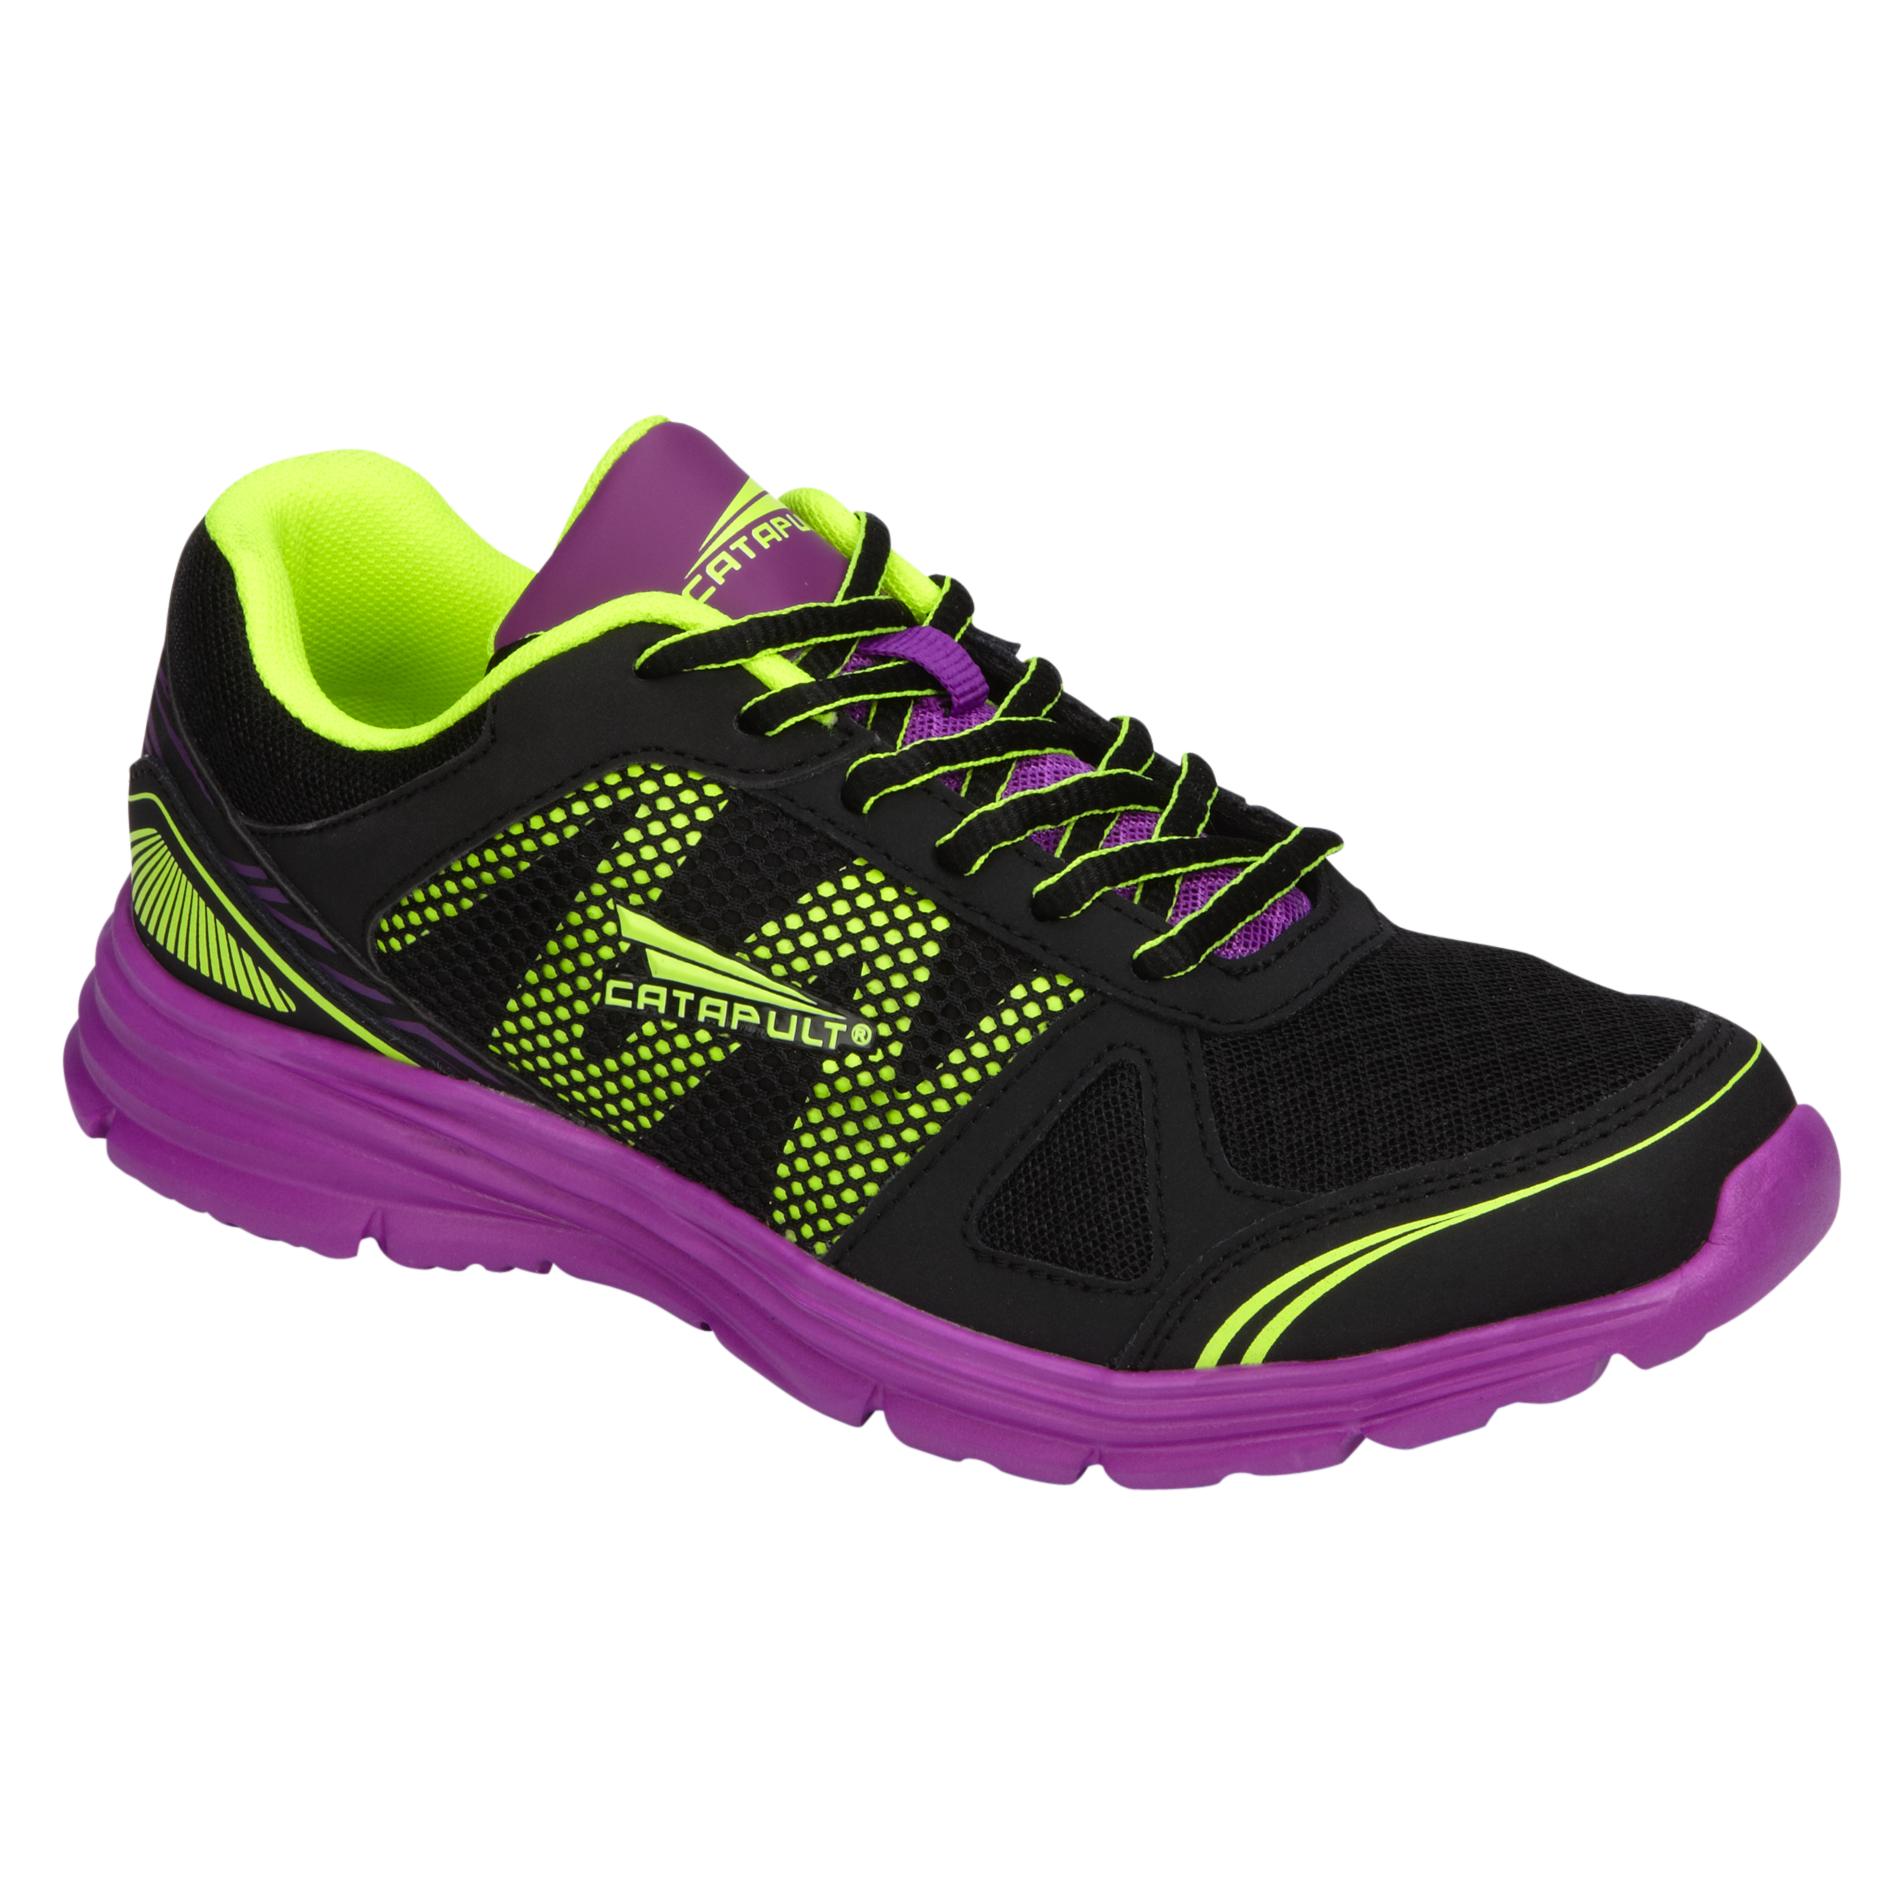 CATAPULT Women's Conquer Purple/Lime Leather Running Shoe